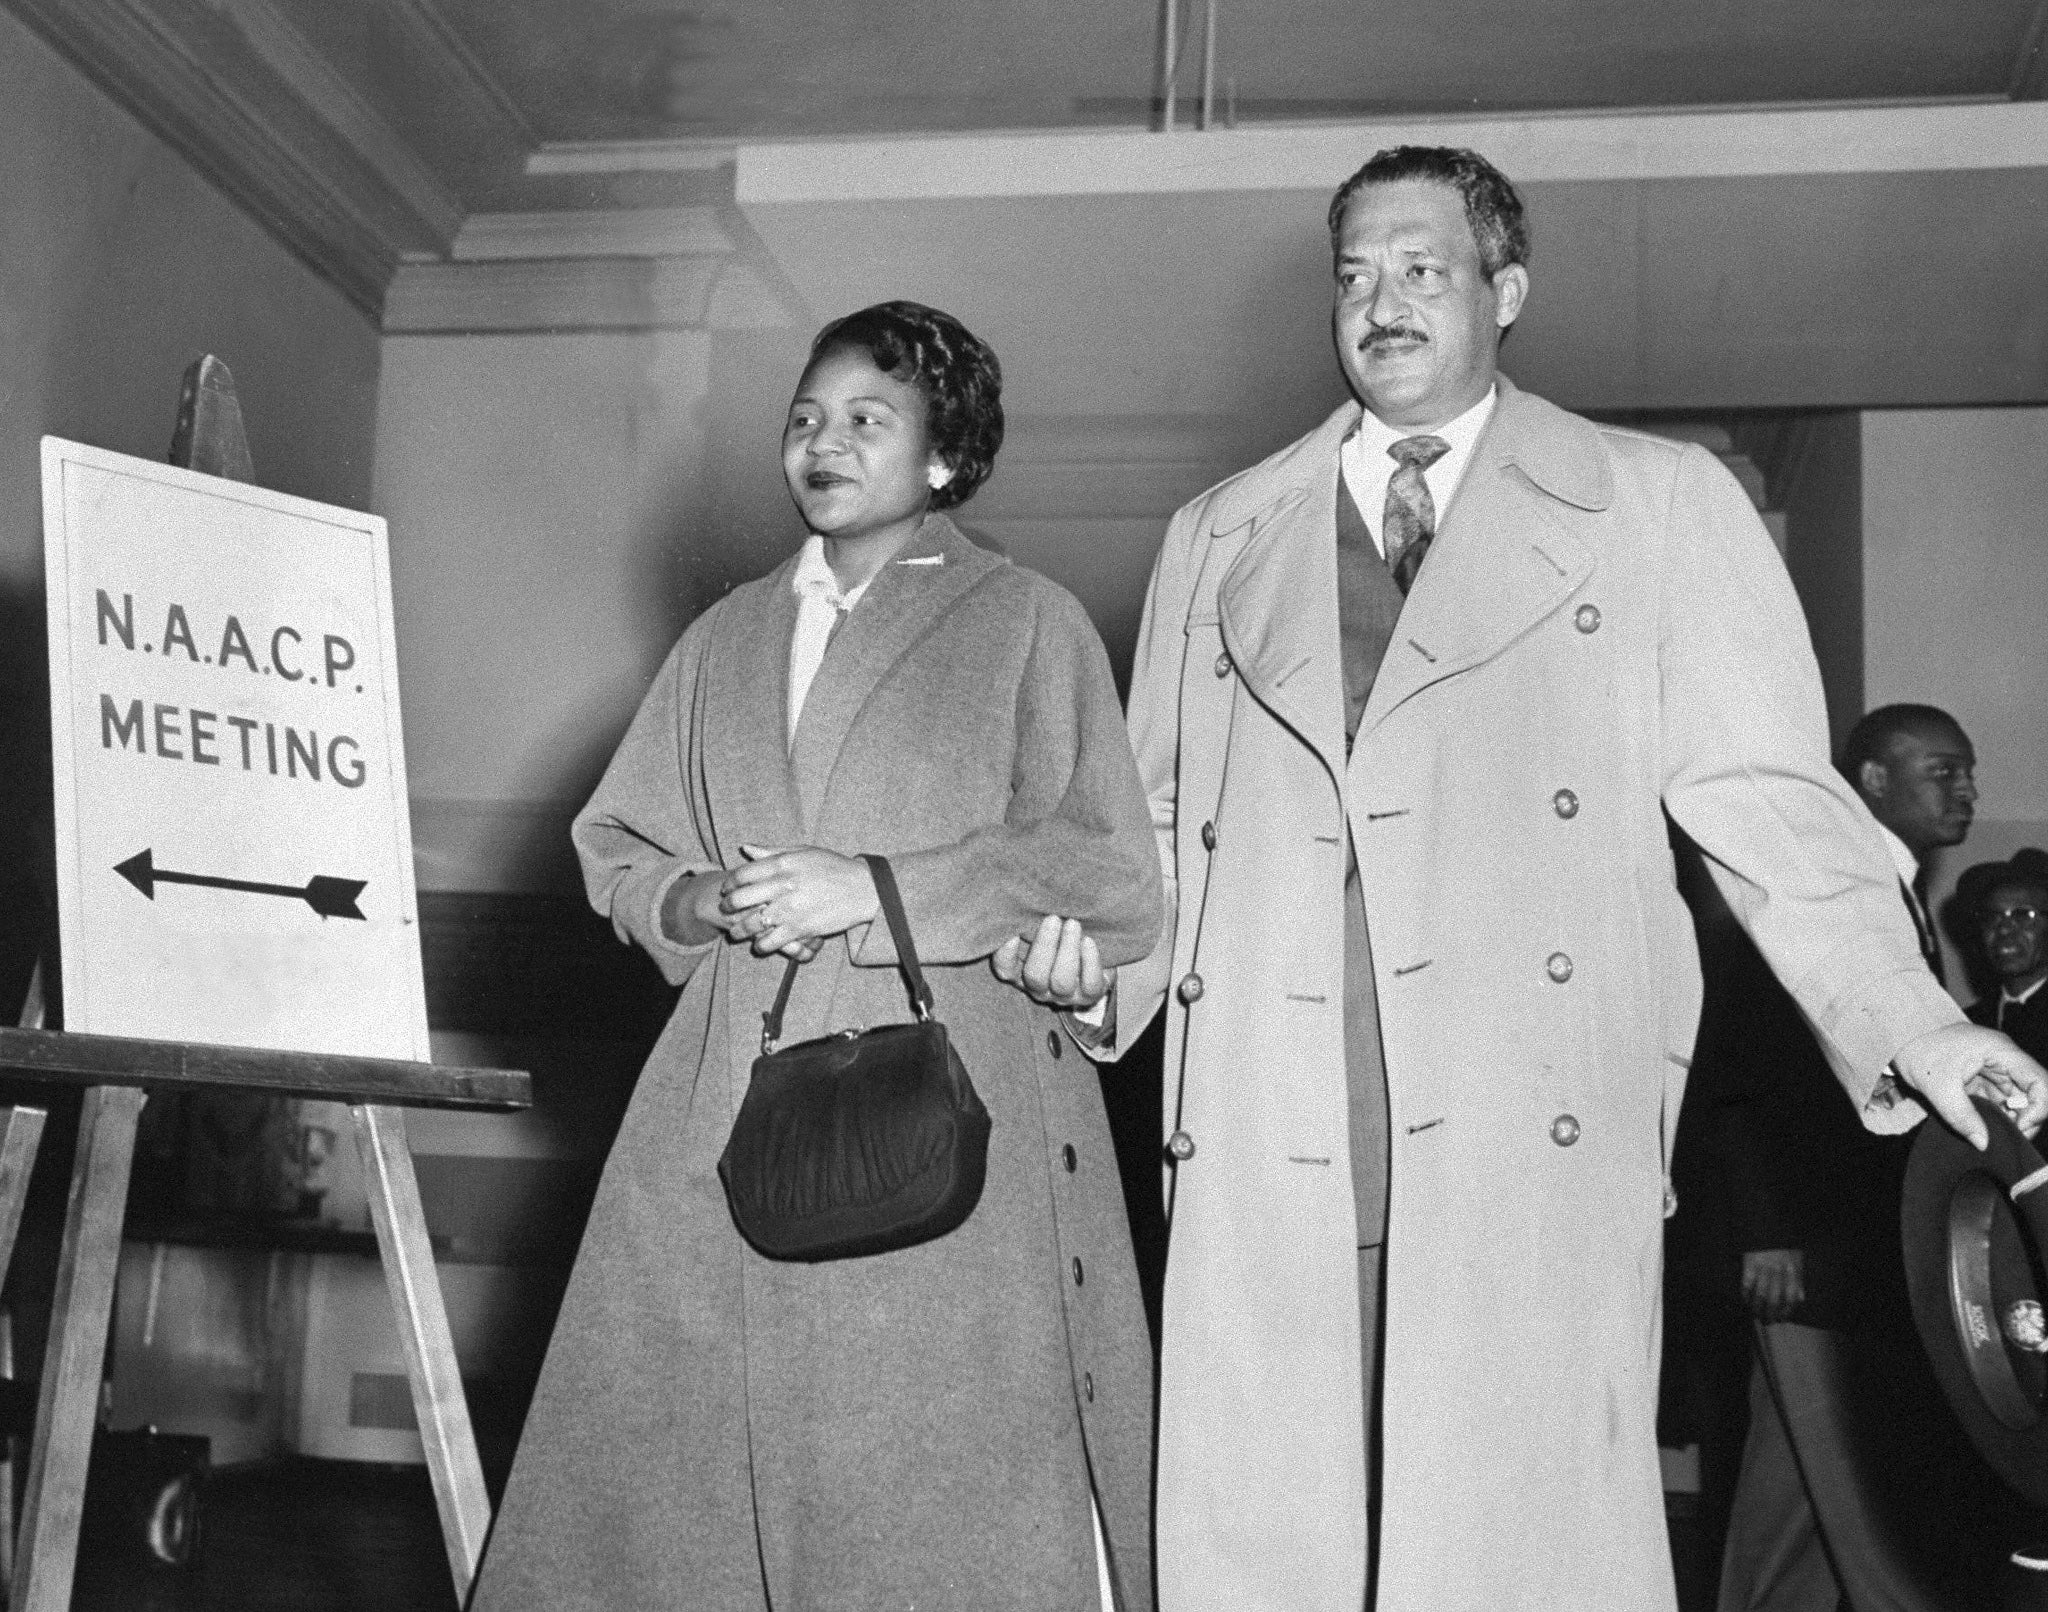 Autherine Lucy Foster Replaces Ku Klux Klan Leader On University of Alabama’s Campus